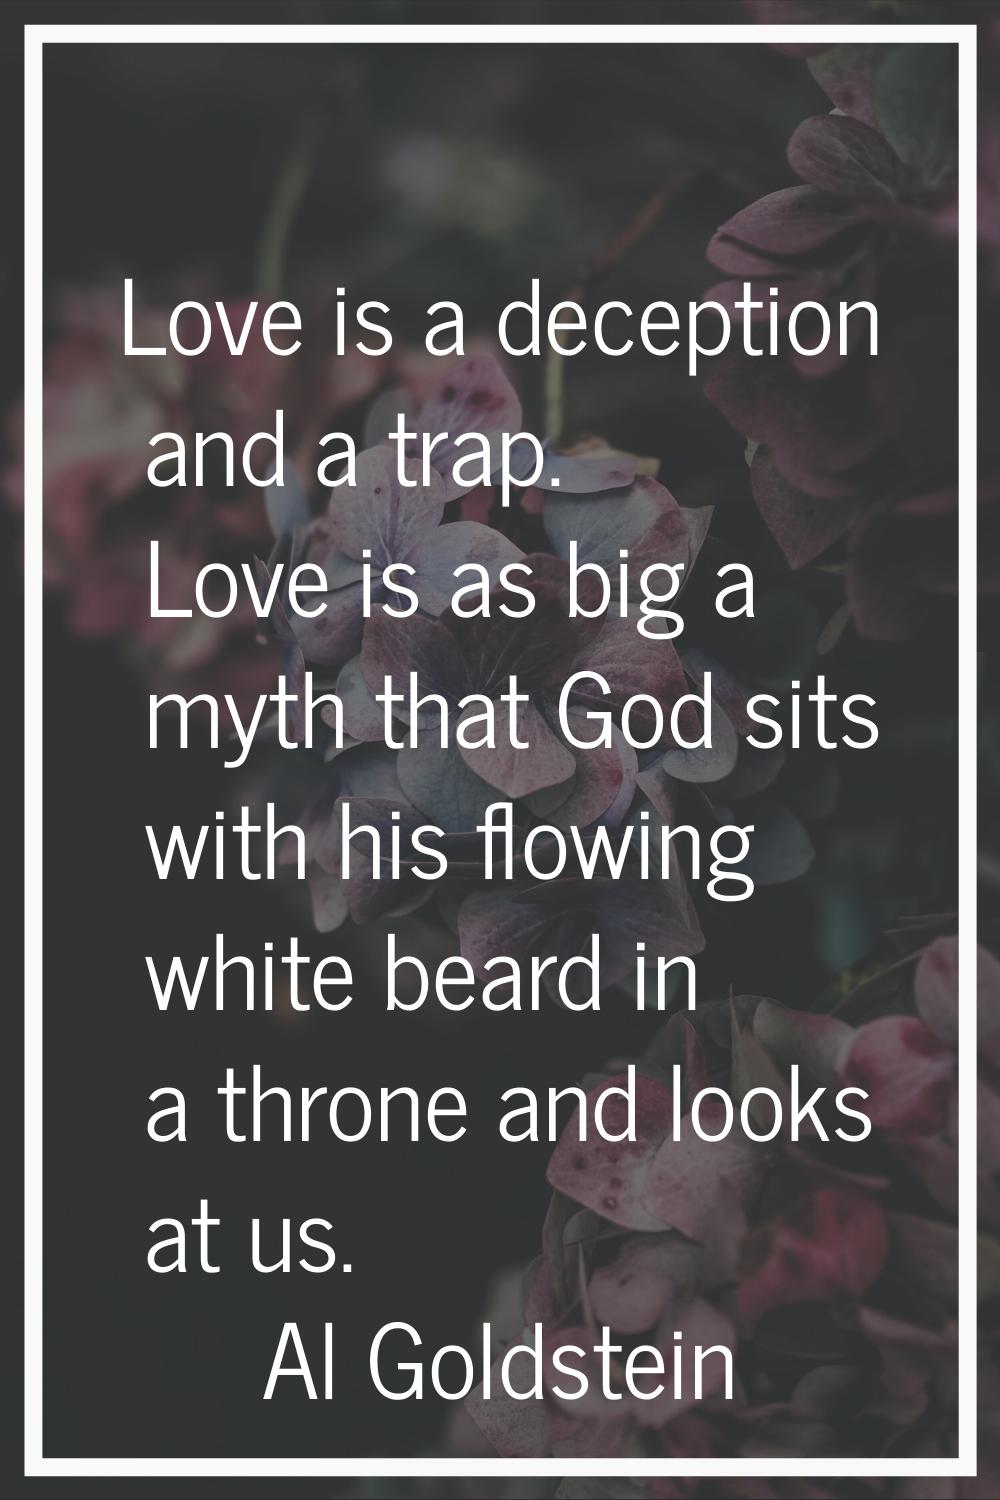 Love is a deception and a trap. Love is as big a myth that God sits with his flowing white beard in